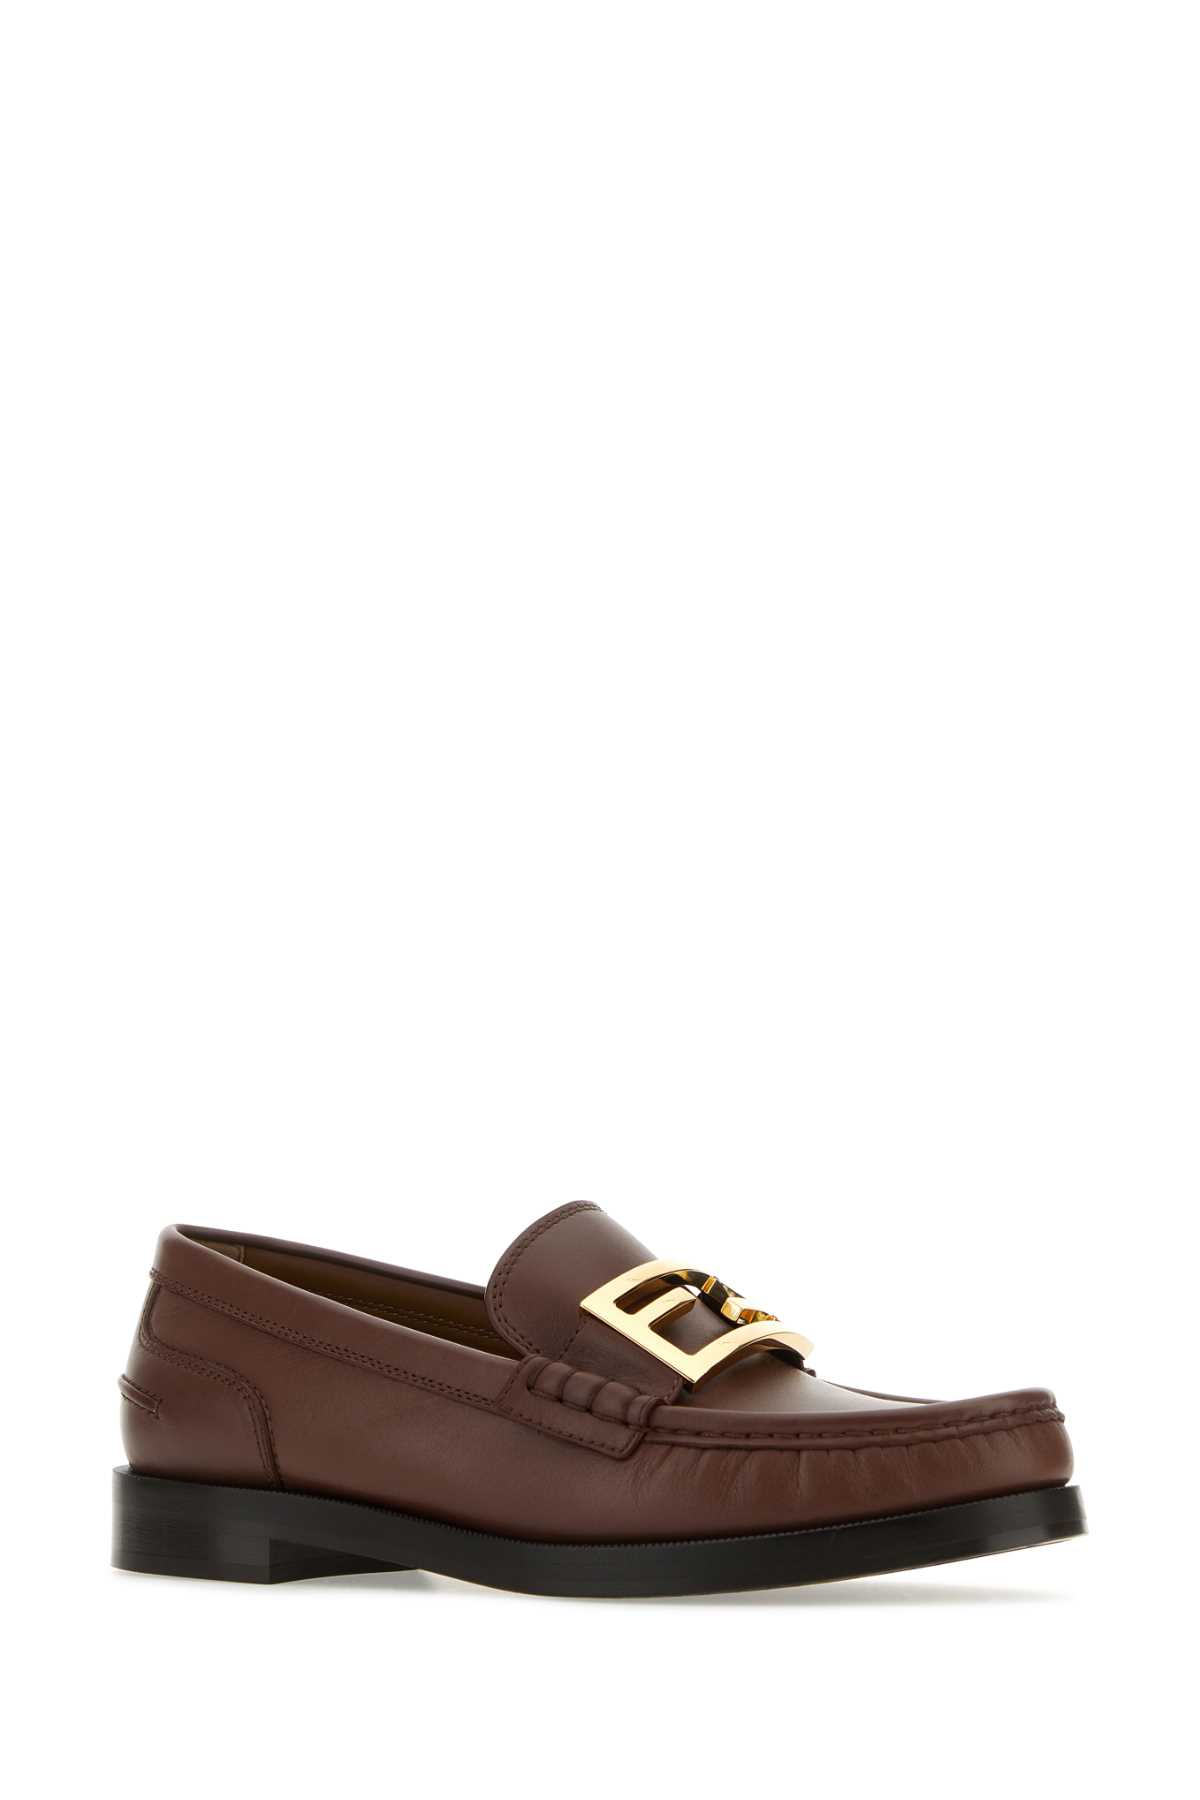 Fendi Brown Leather Baguette Loafers In Acorn